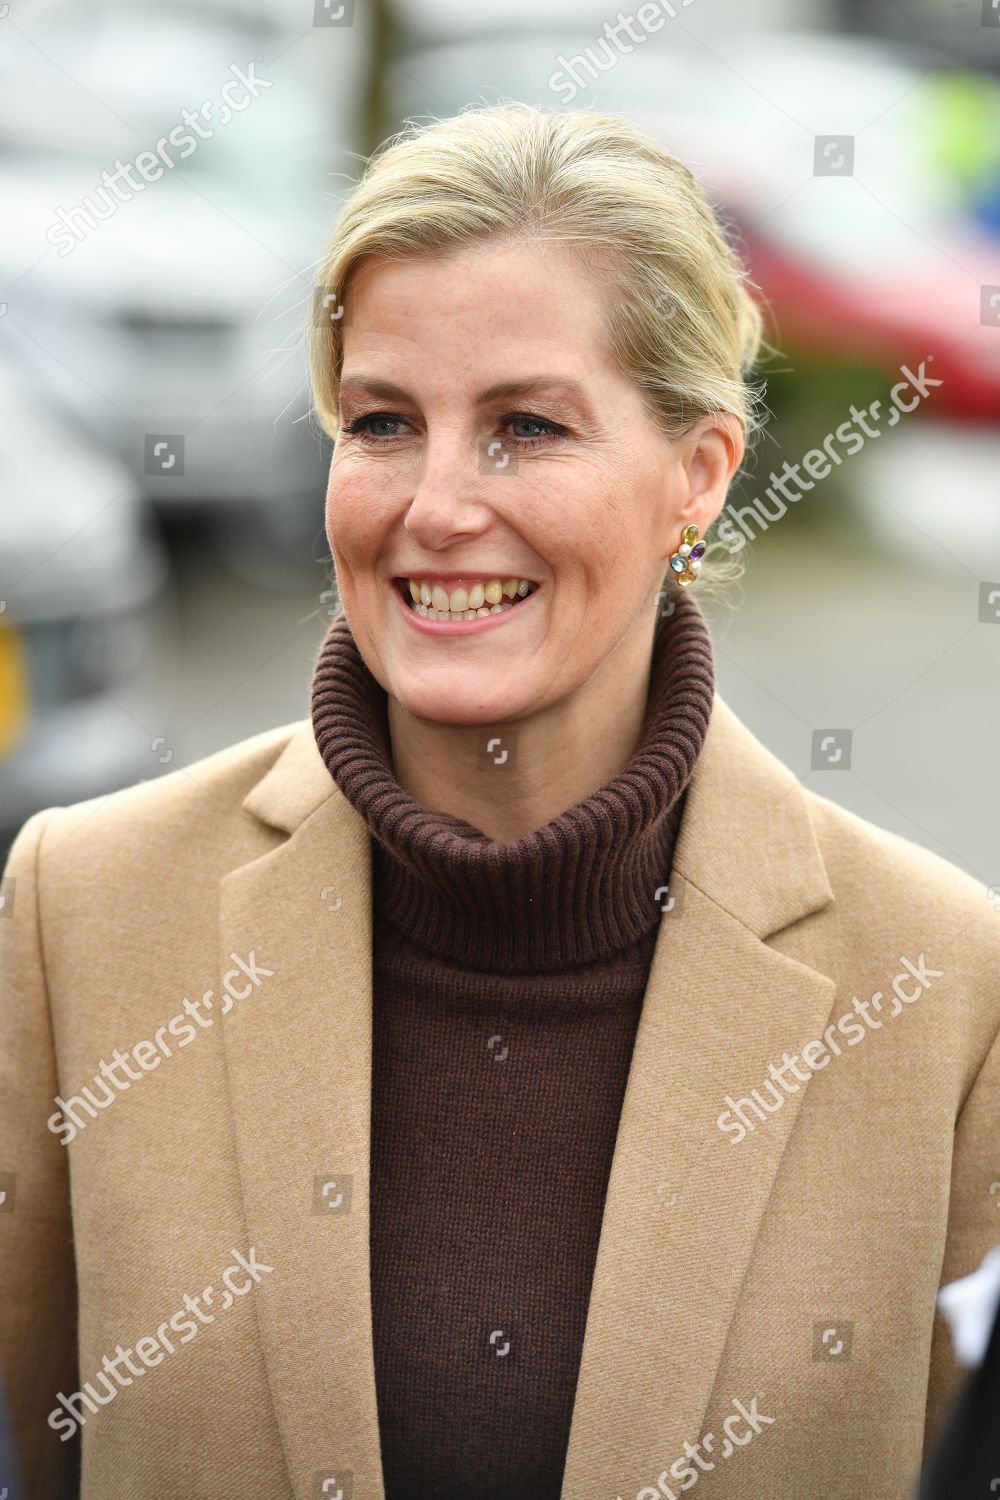 sophie-countess-of-wessex-visit-to-cumbria-shutterstock-editorial-10095439a.jpg